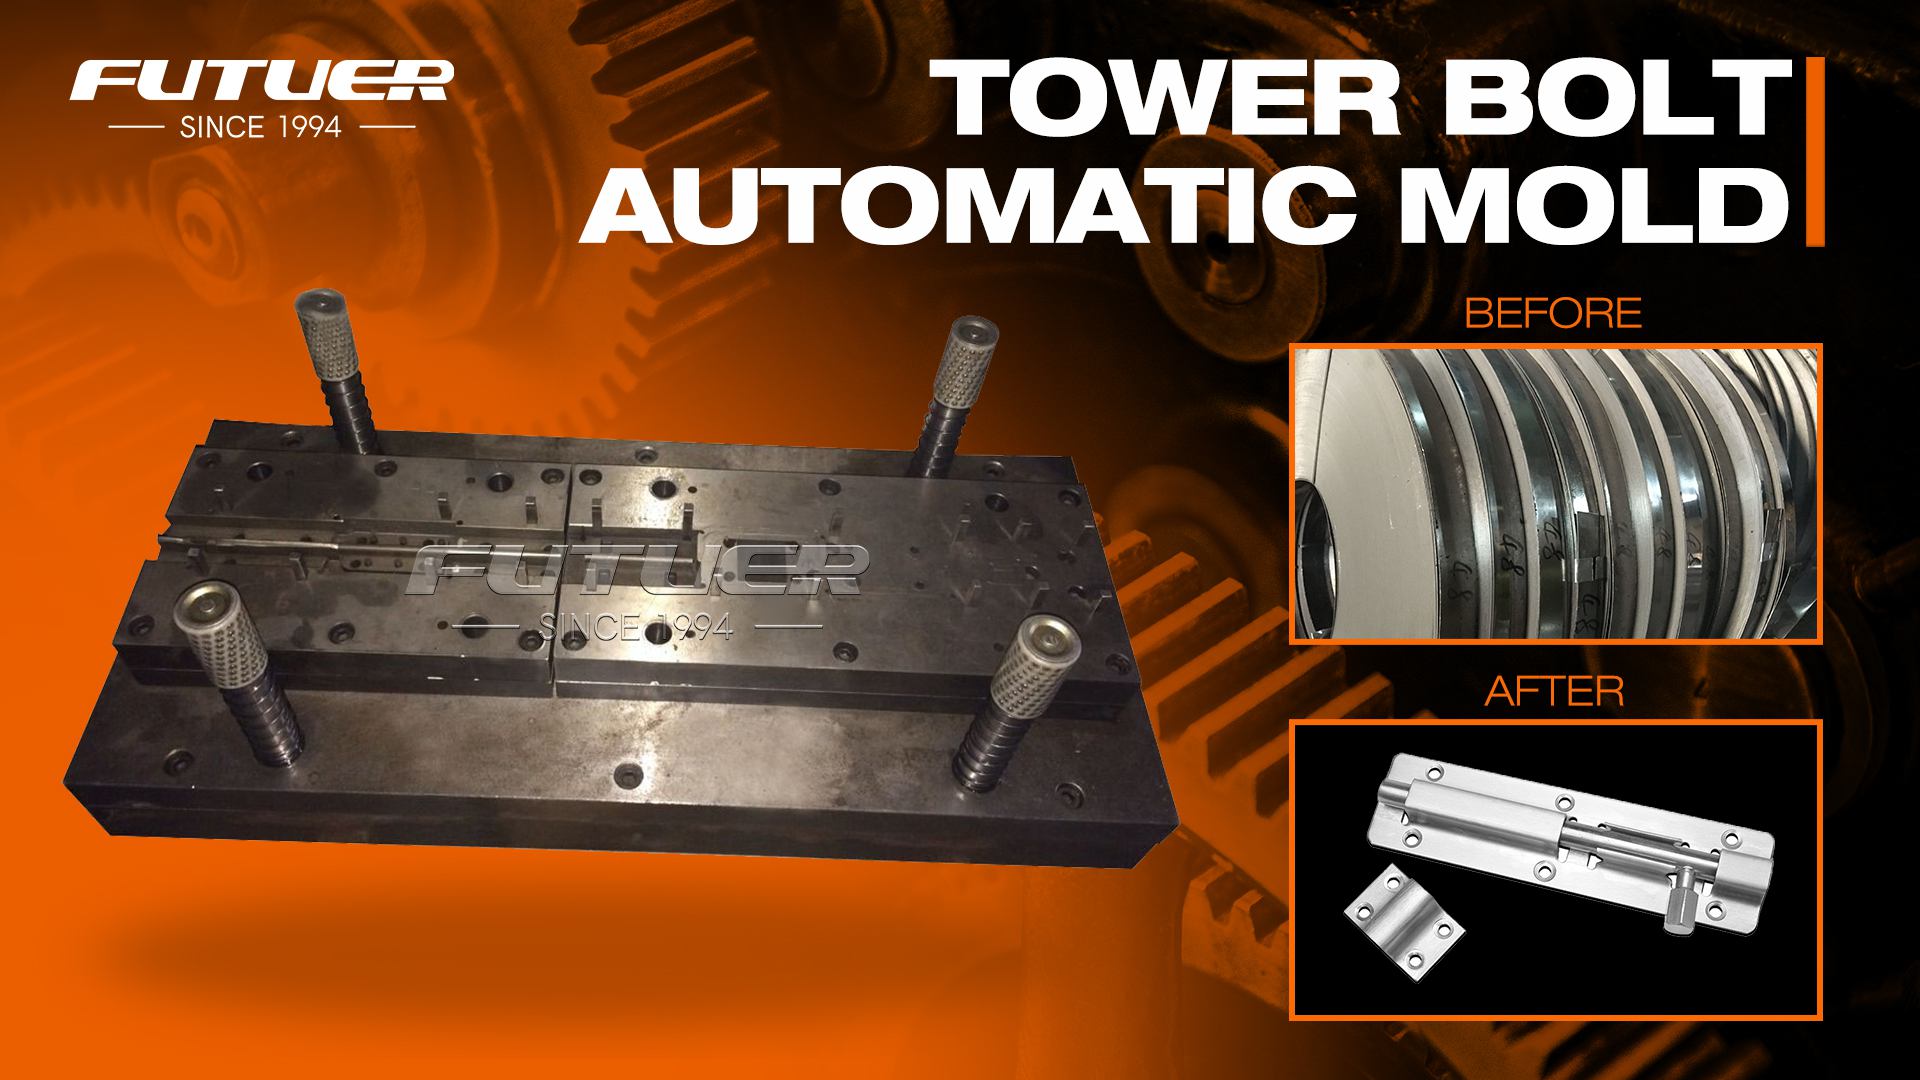 Tower Bolt Automatic Mold